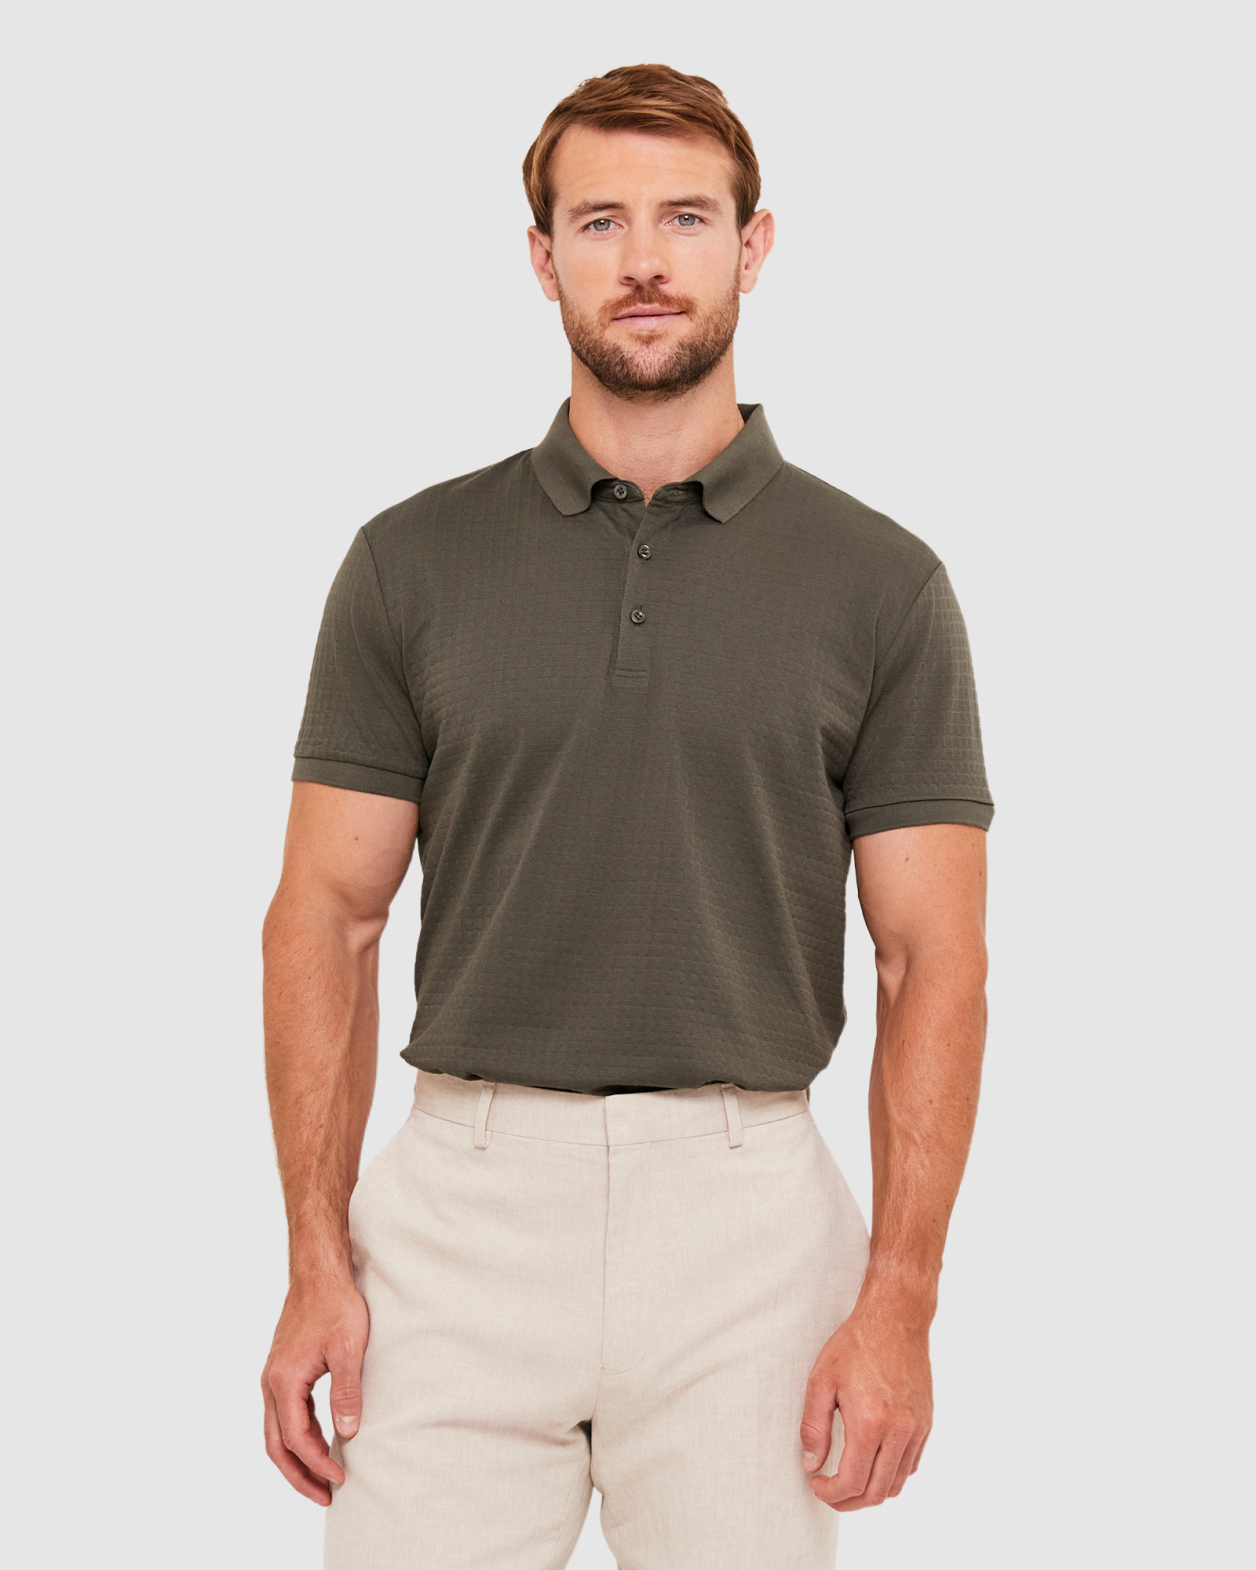 Carlos Textured Polo in MILITARY